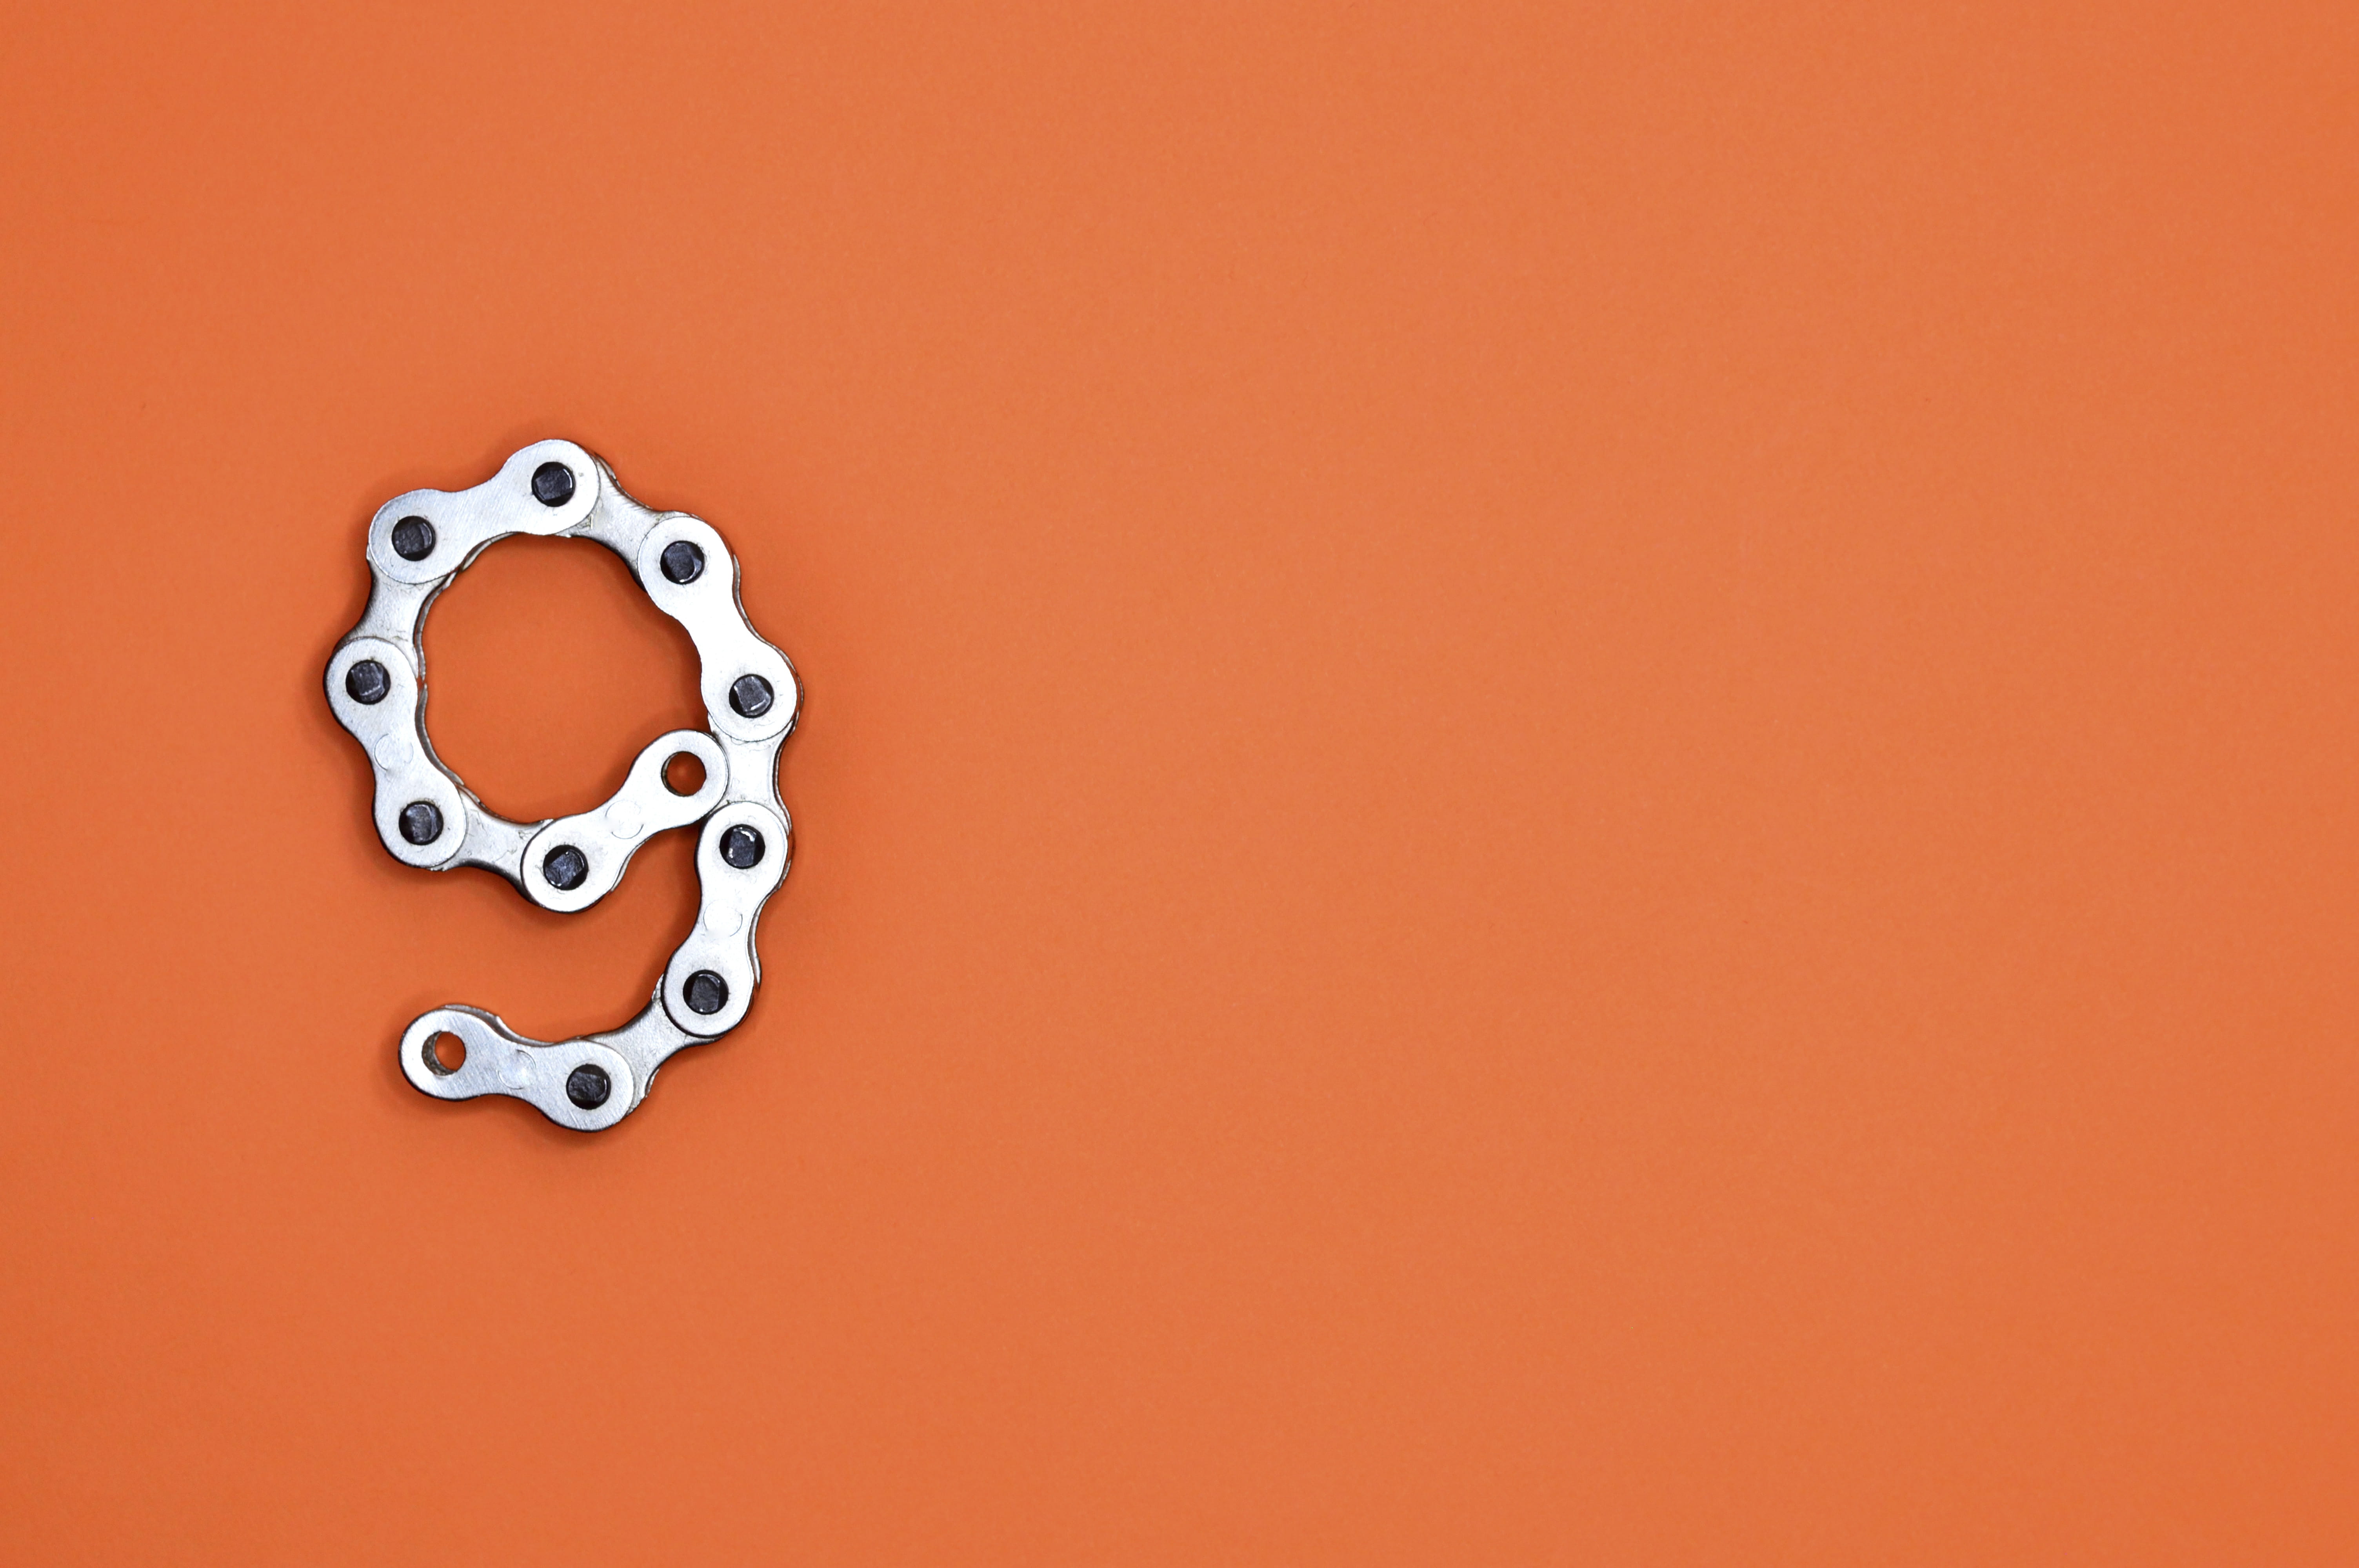 Gray Bicycle Chain on Orange Surface, 9, art, background, chrome